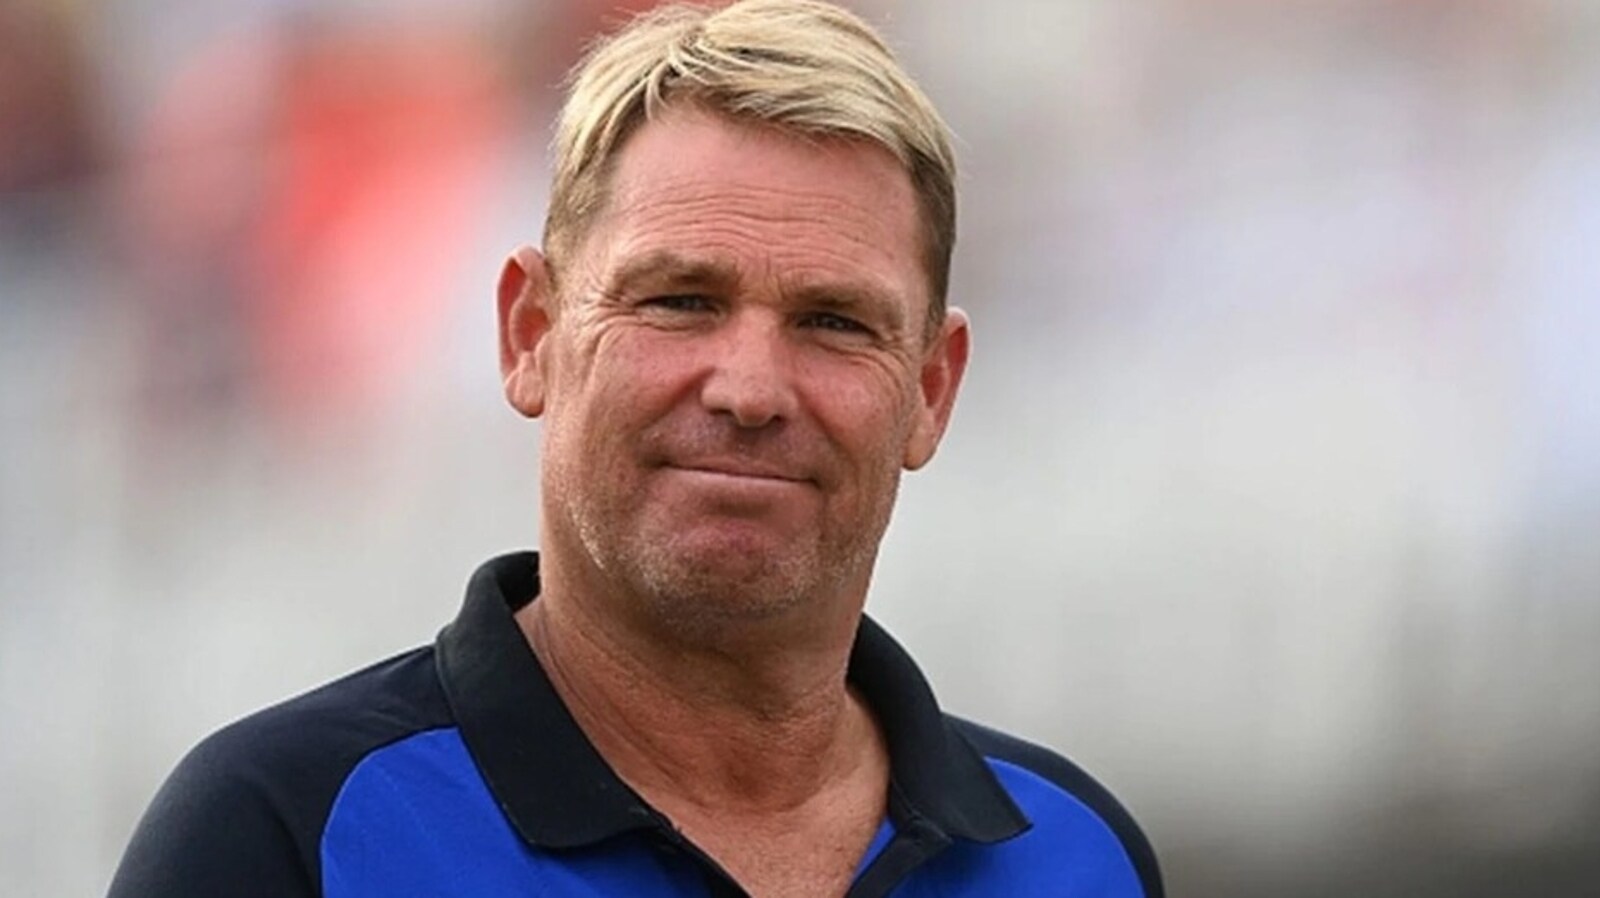 Shane Warne dies of suspected heart attack at 52; know what may cause sudden heart attacks